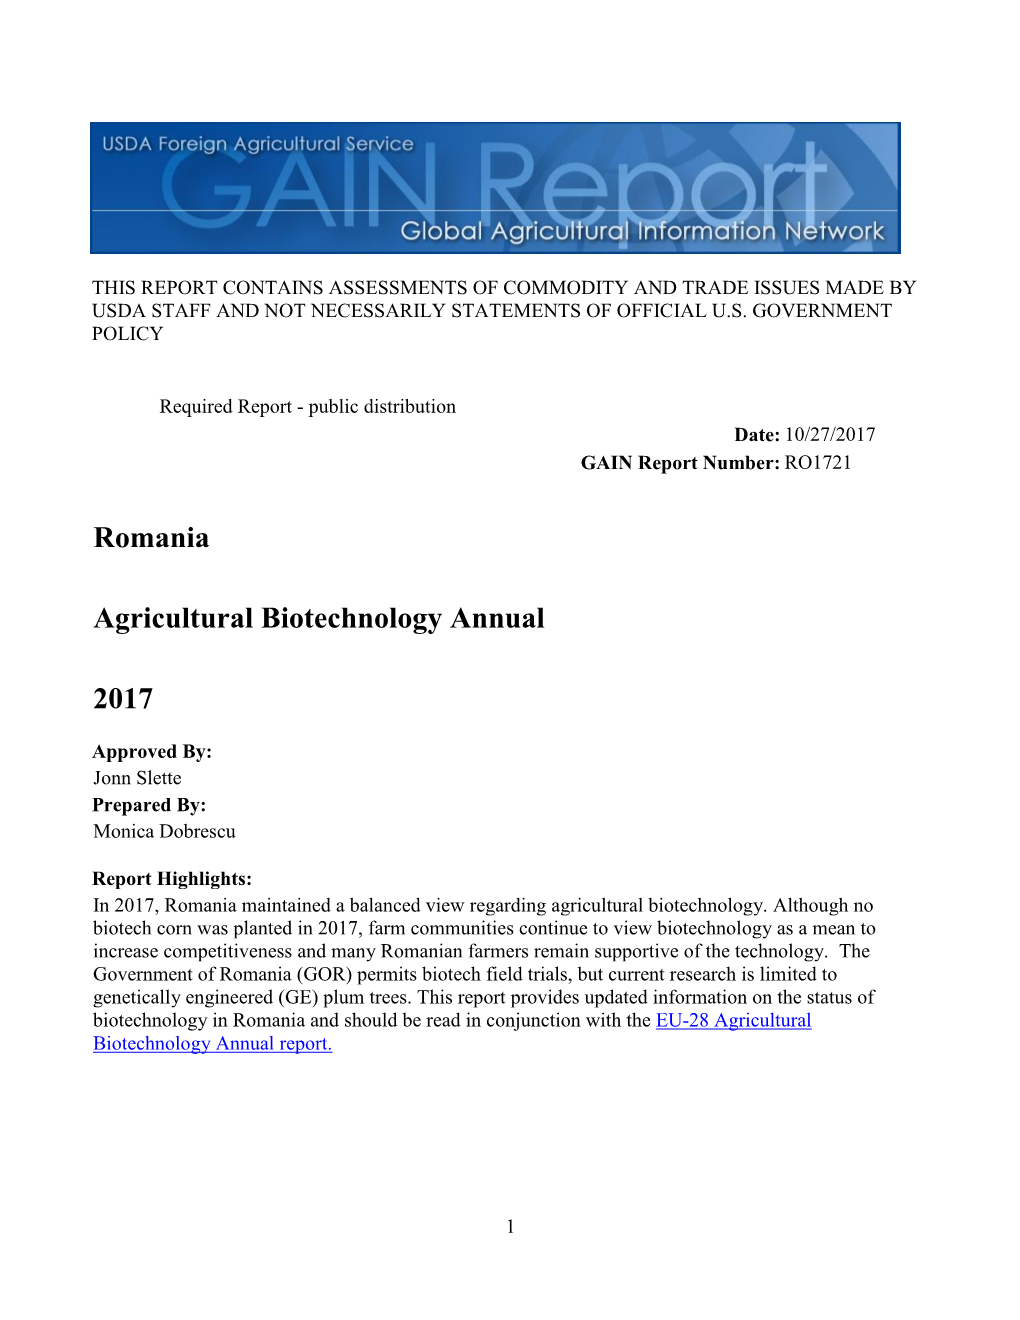 2017 Agricultural Biotechnology Annual Romania